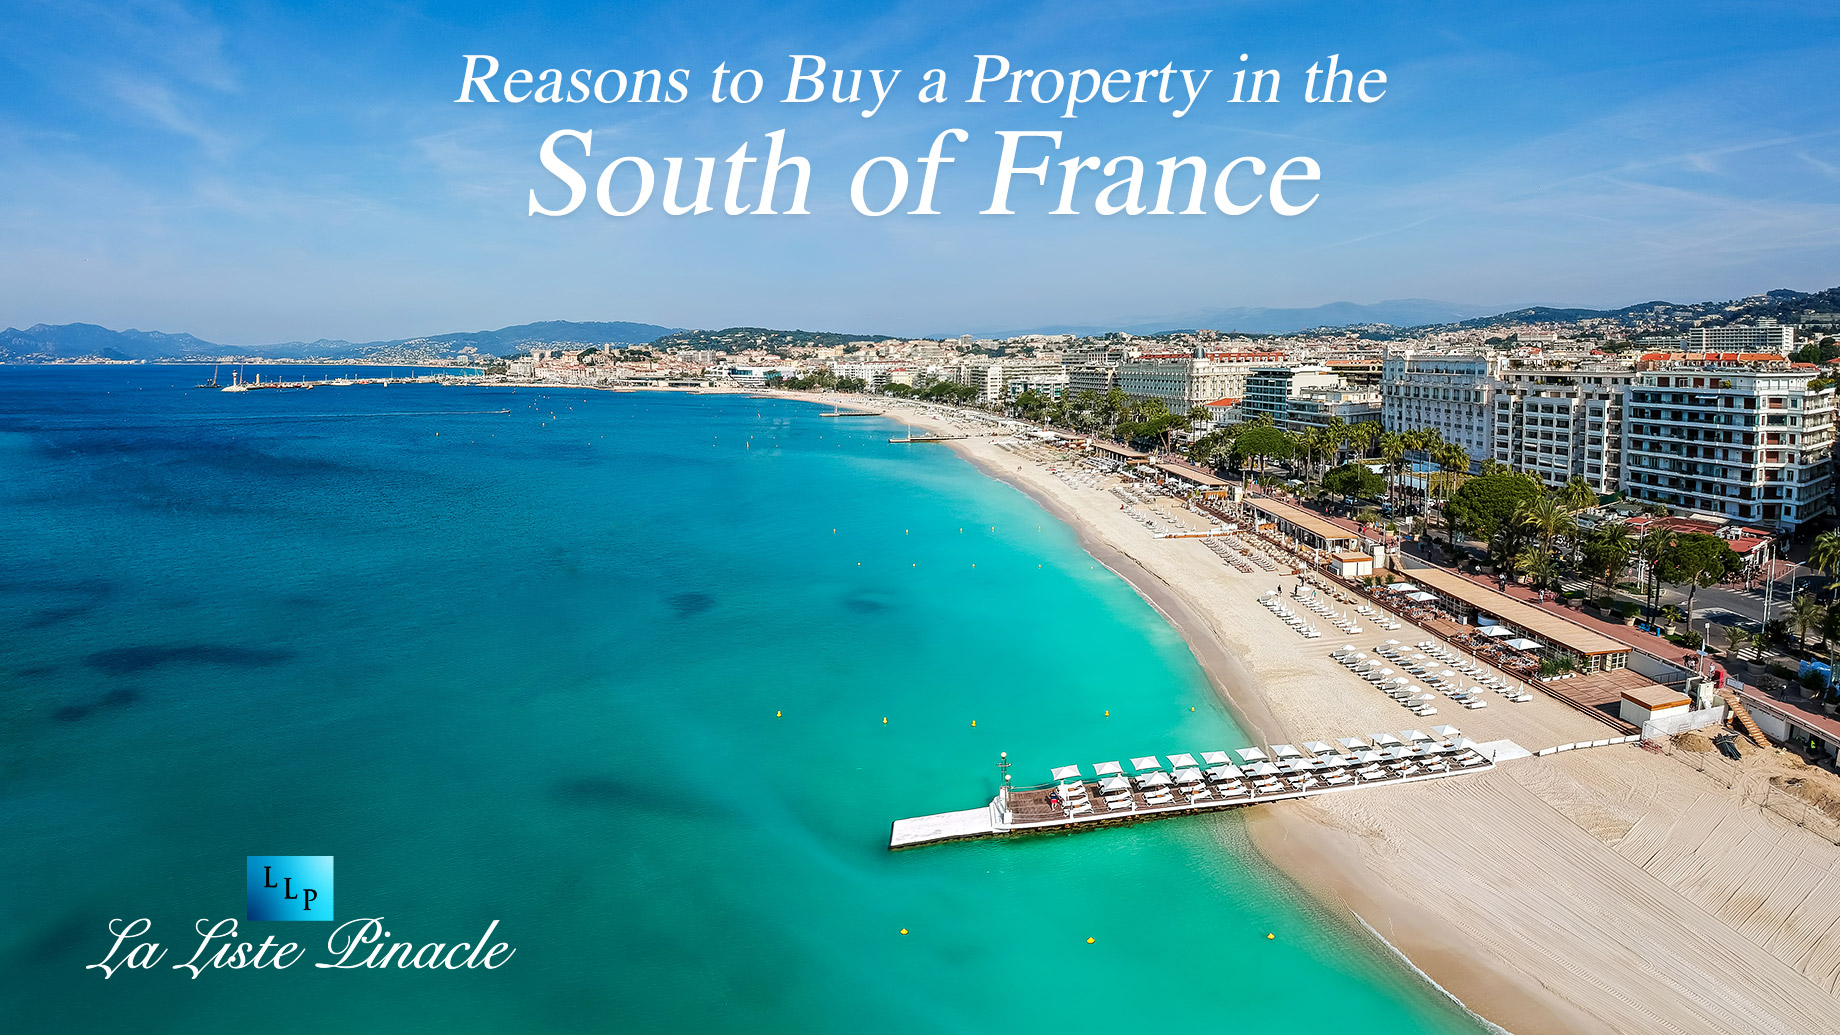 Reasons to Buy a Property in the South of France